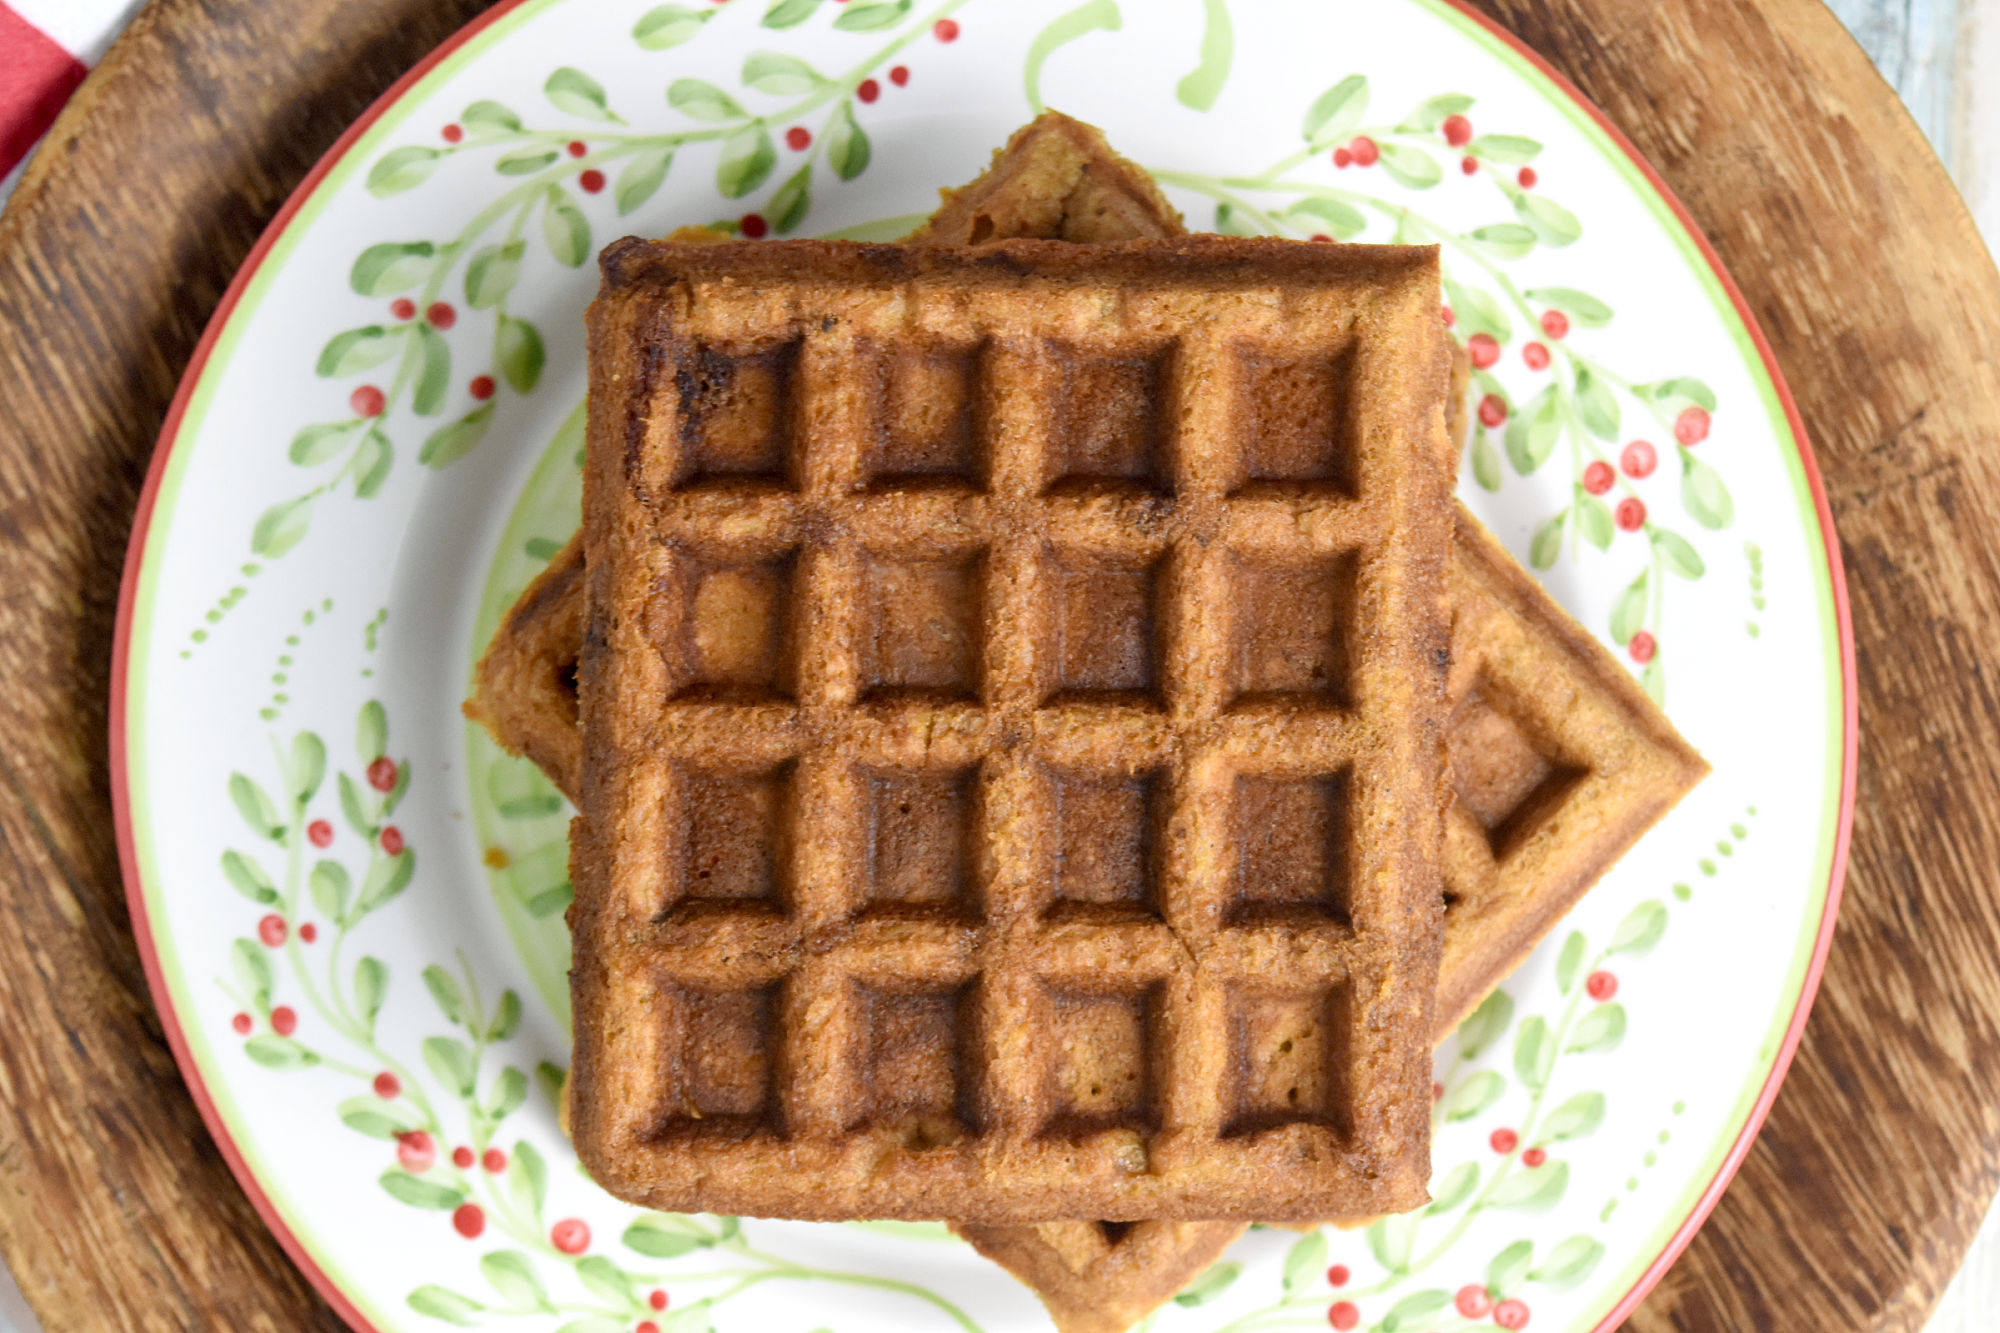 Gingerbread Waffles have all the gingerbread flavor in a delicious and easy waffle form. The spices are warming and delicious and the waffles whip up in minutes. Perfect for a holiday brunch. #ChristmasSweetsWeek #waffle #gingerbread #gingerbreadwaffles #easy #brunch